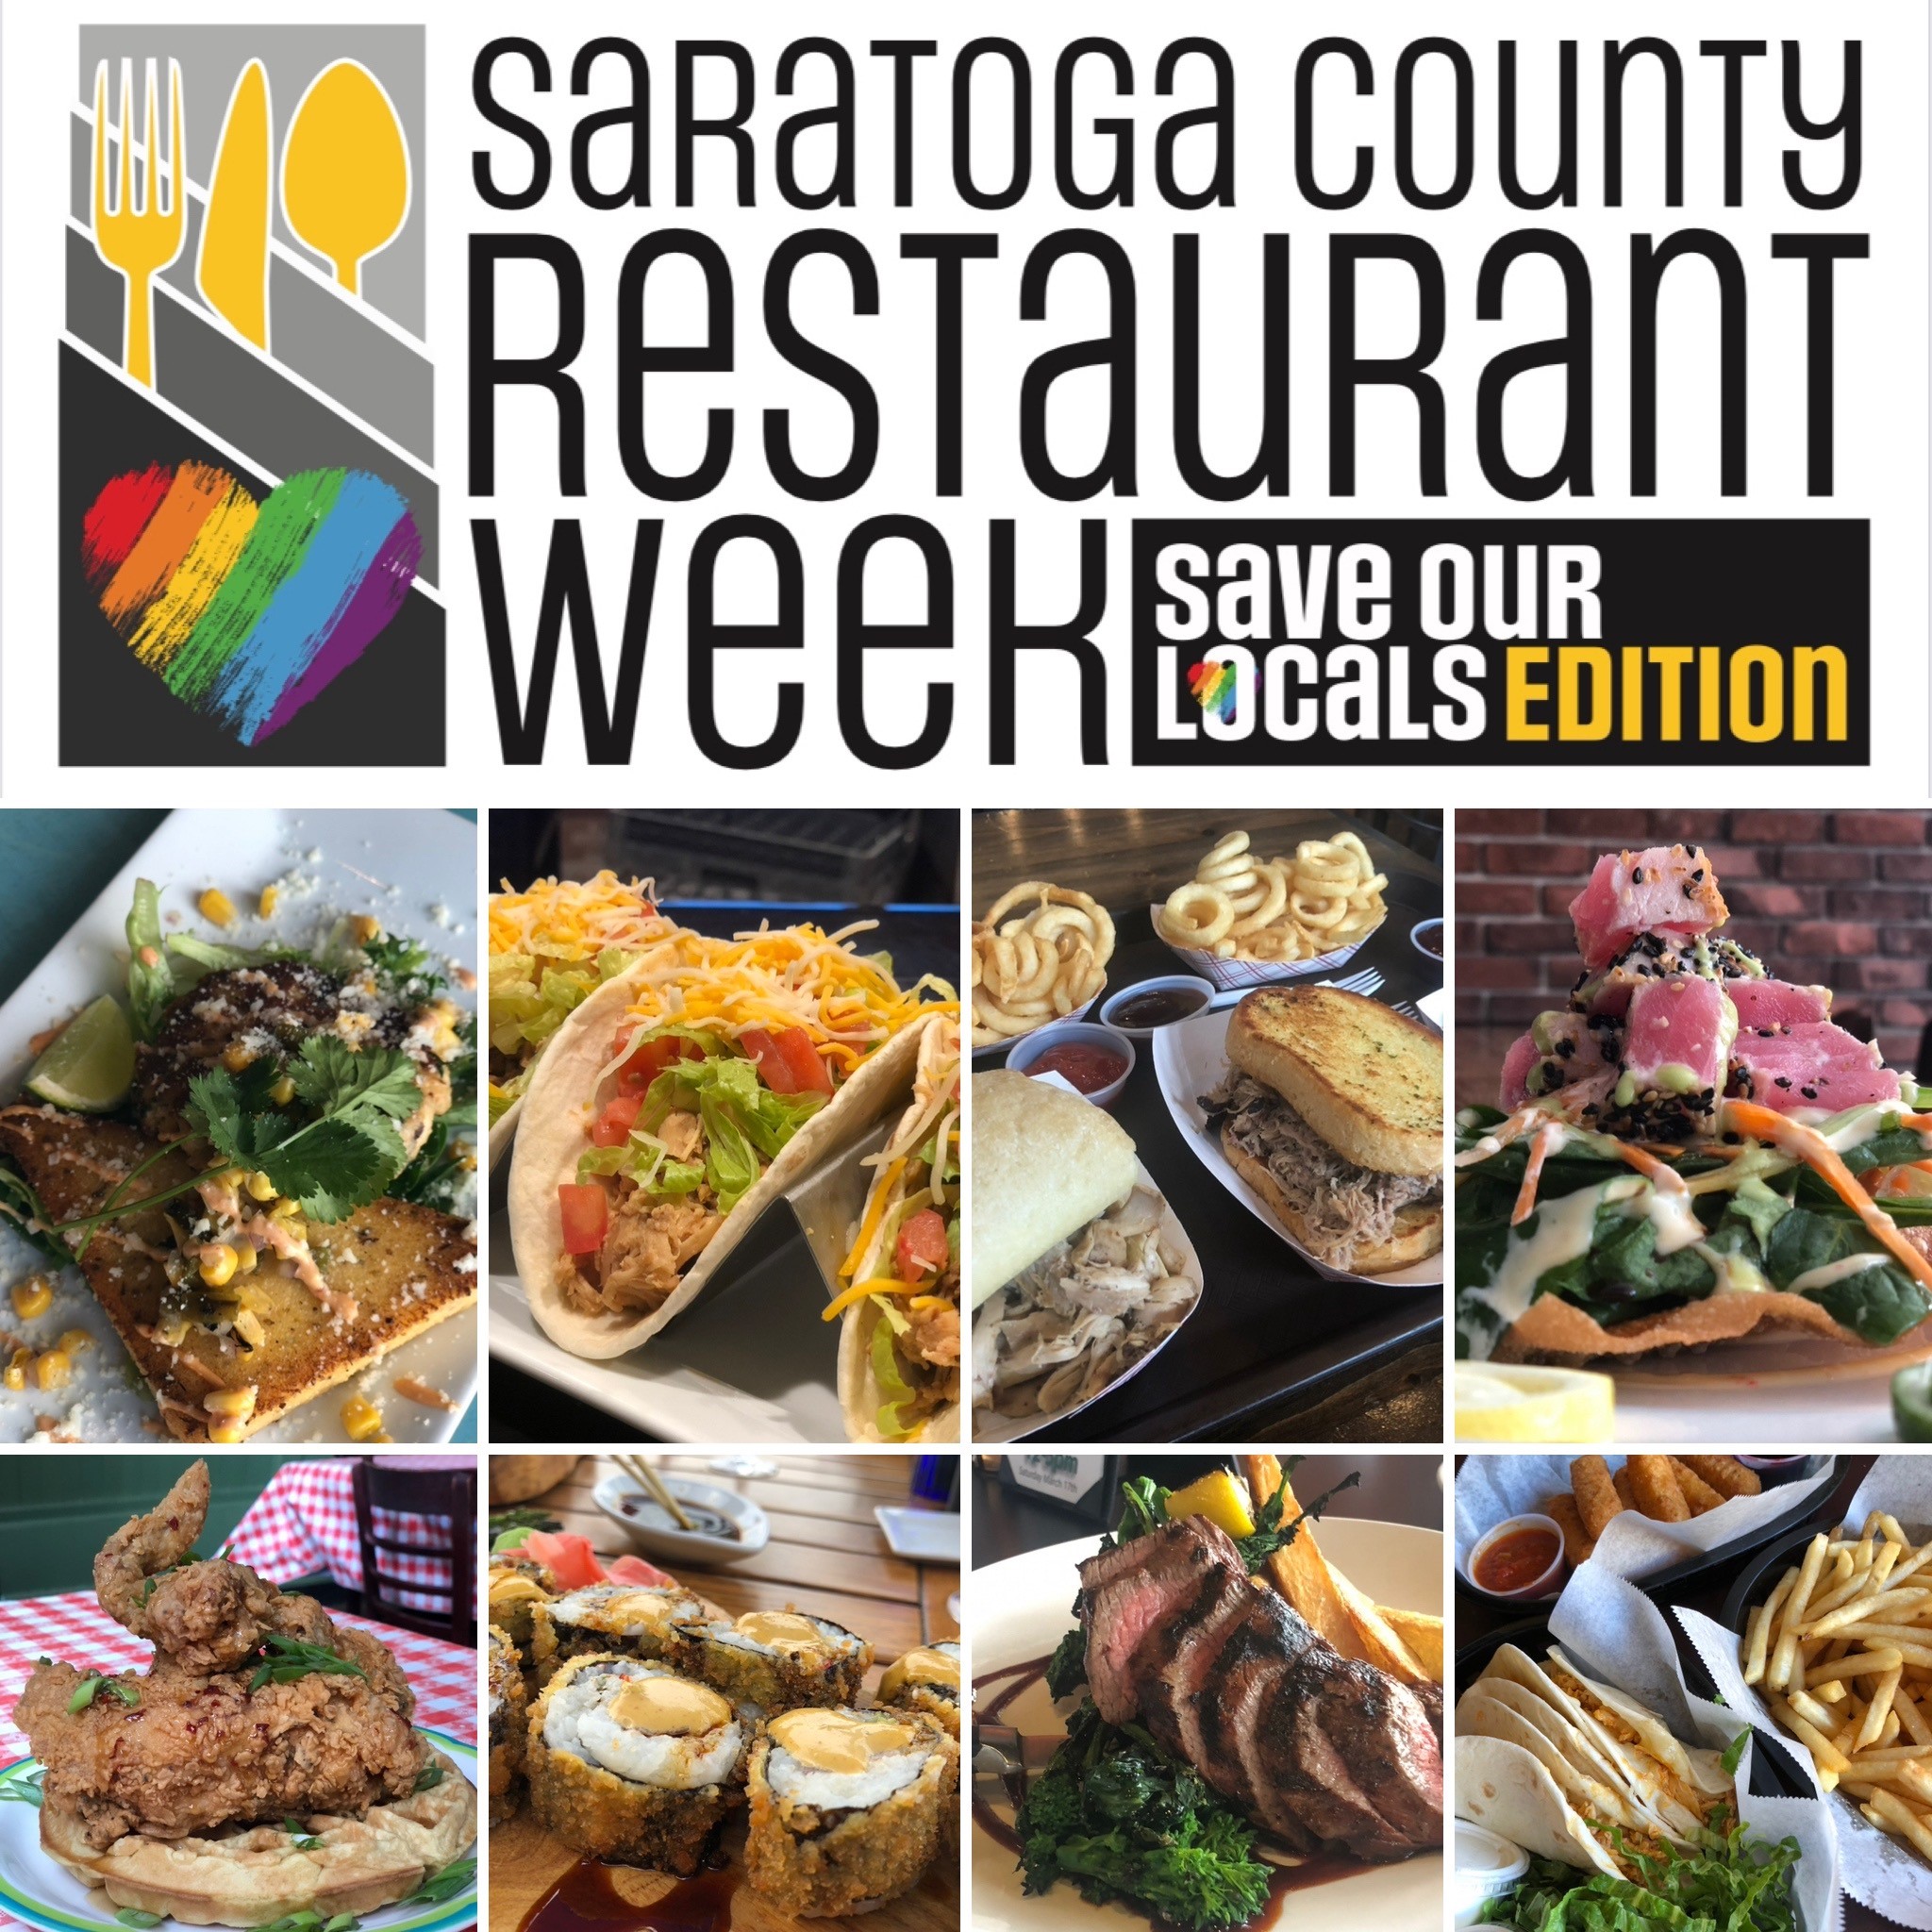 Restaurant Week Save Our Locals Saratoga County Chamber of Commerce